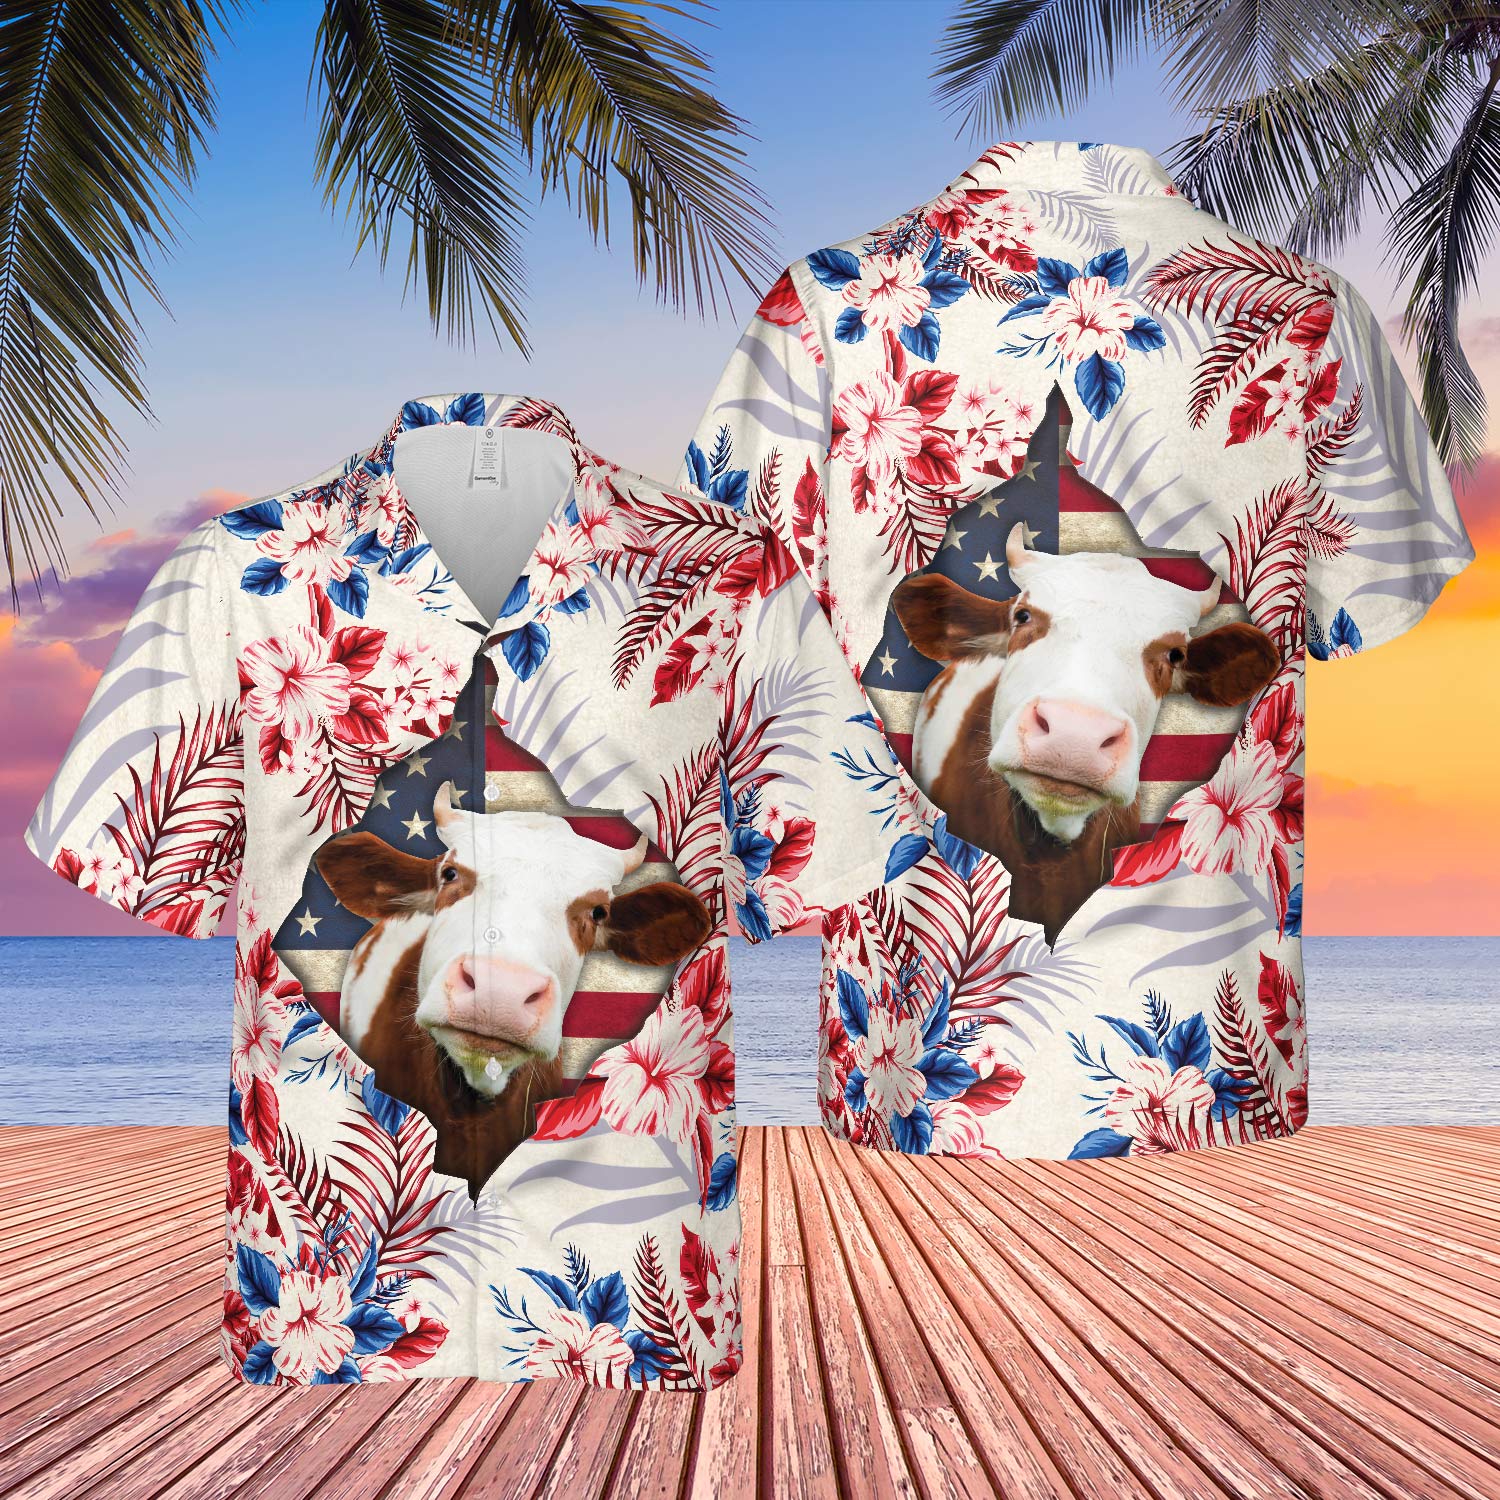 Hereford Face Hibiscus Flower All Over Printed 3D Hawaiian Shirt